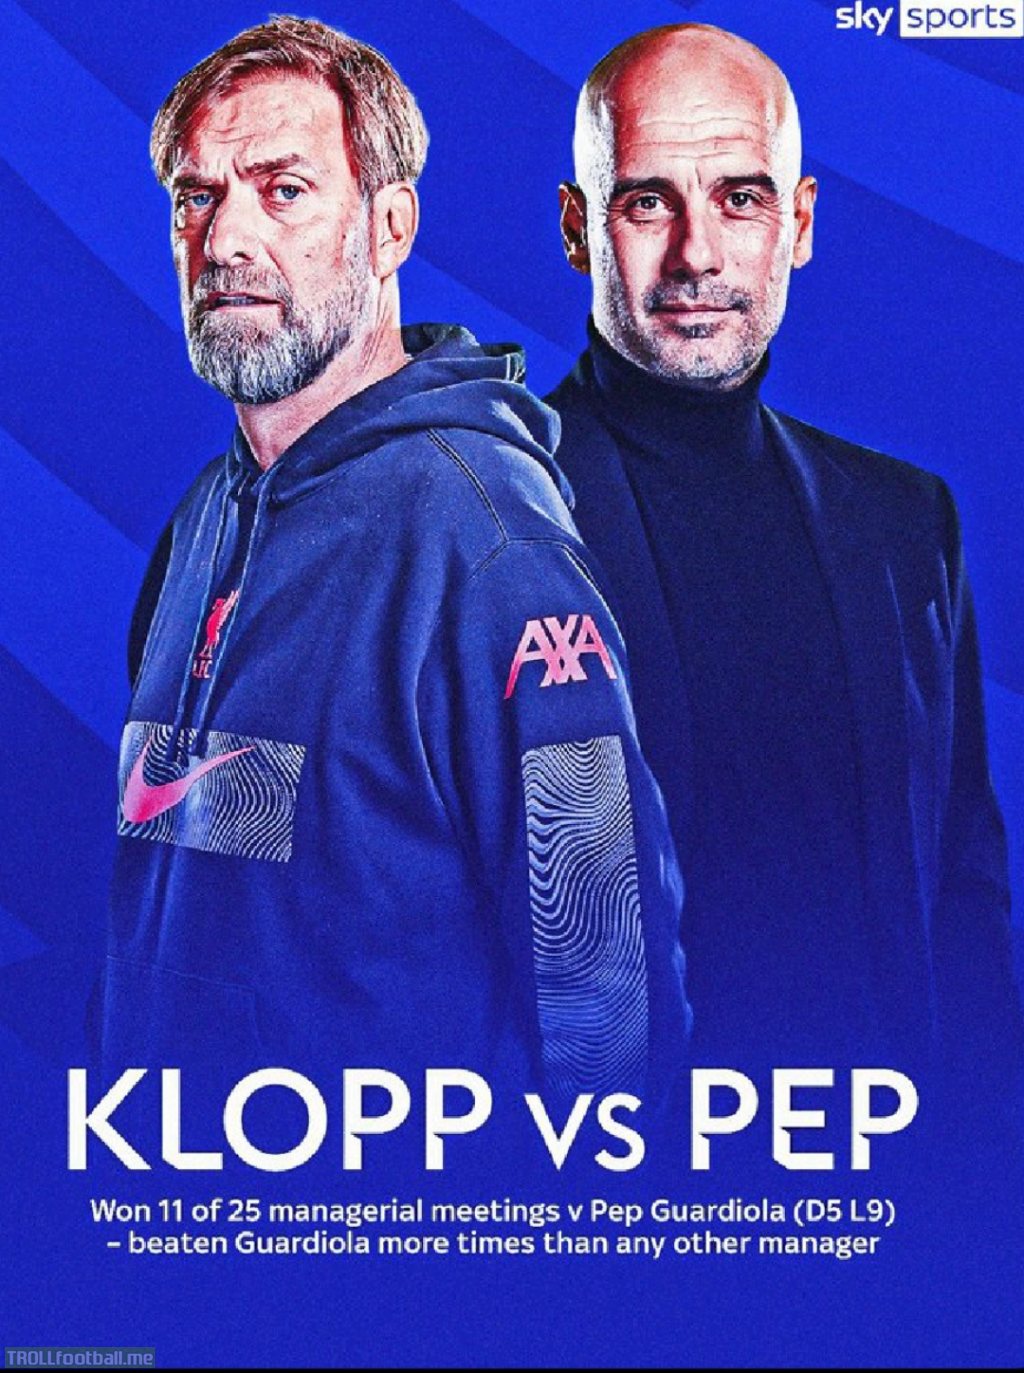 [Sky Sports PL] Jurgen Klopp has defeated the Man City boss more than any other coach in the game...(11 Klopp - 9 Pep, 5 draws)